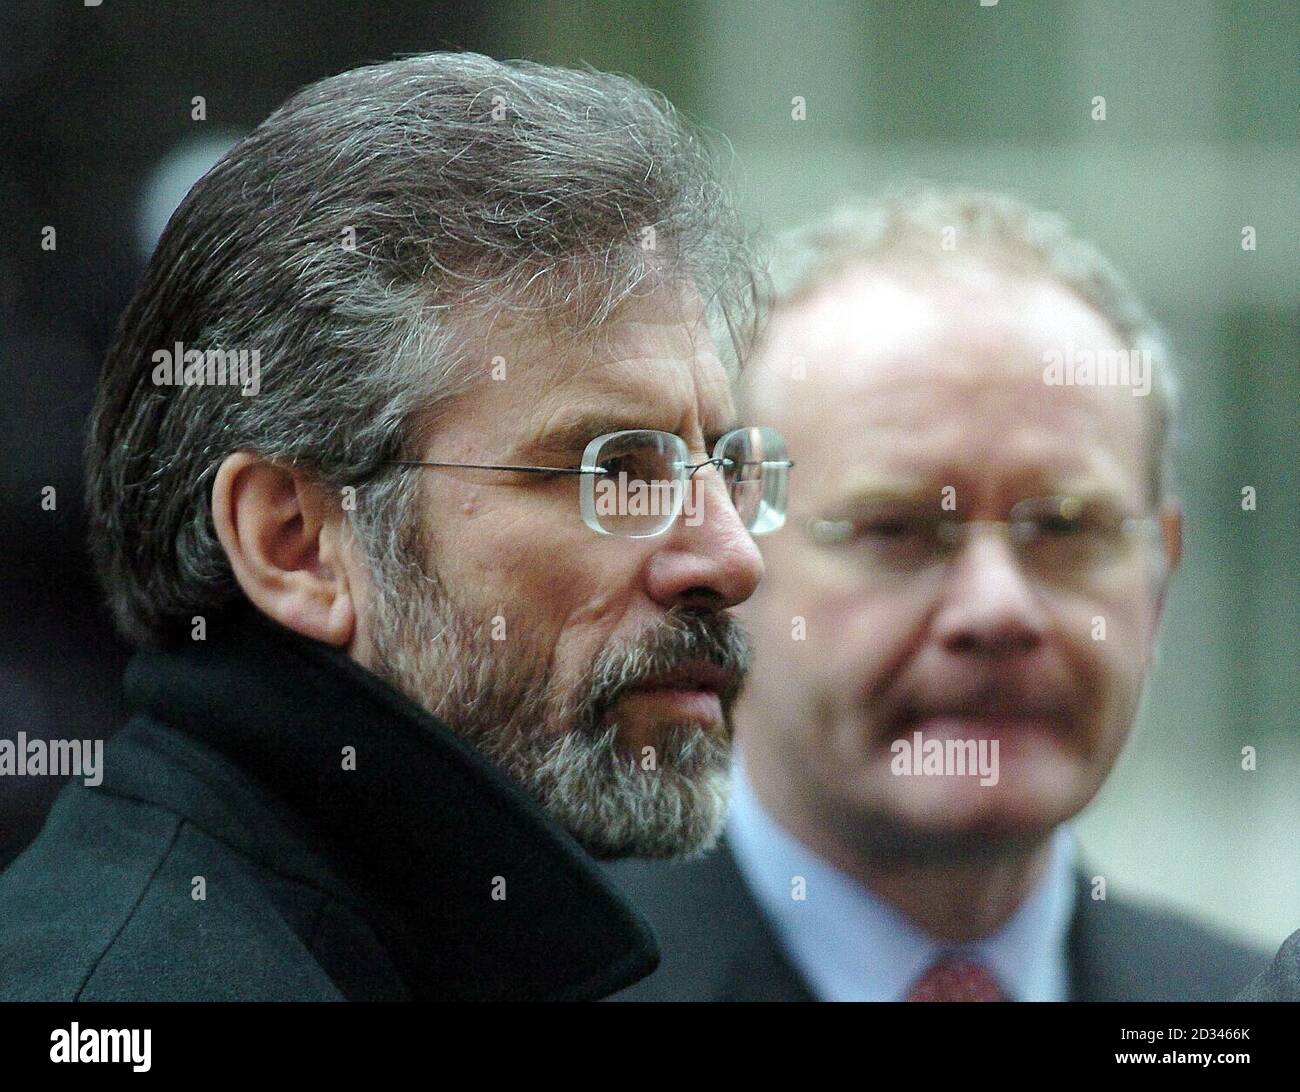 Sinn Fein leader Gerry Adams and Martin McGuinness arrive in Downing Street, London as the agonising effort to close a peace process deal continues. British and Irish government officials believe Sinn Fein and the Rev Ian Paisley's Democratic Unionists are tantalisingly close to striking a deal which would bring back power sharing and see the gun removed permanently from Northern Ireland politics. Stock Photo